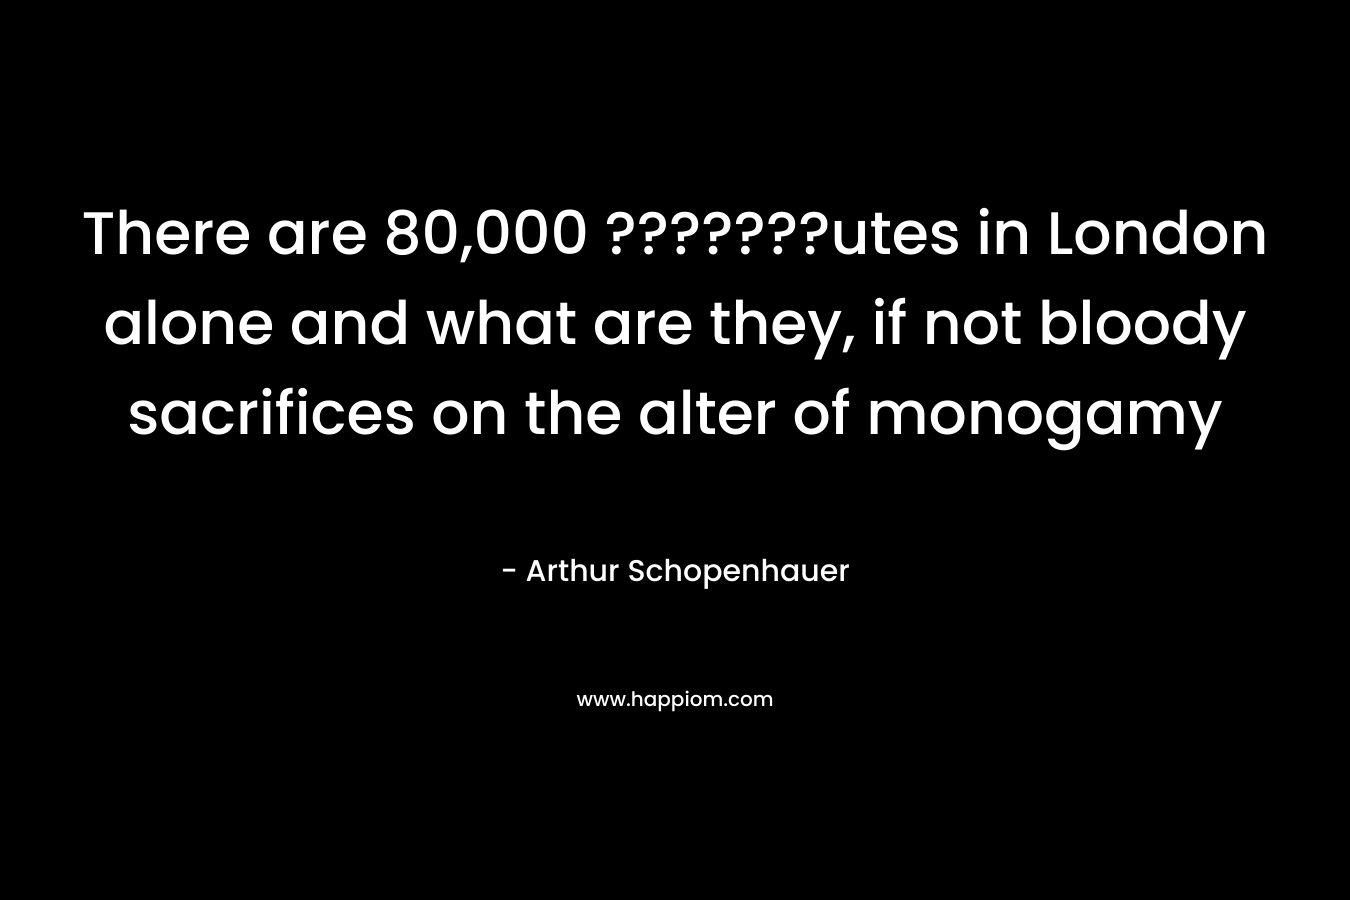 There are 80,000 ???????utes in London alone and what are they, if not bloody sacrifices on the alter of monogamy